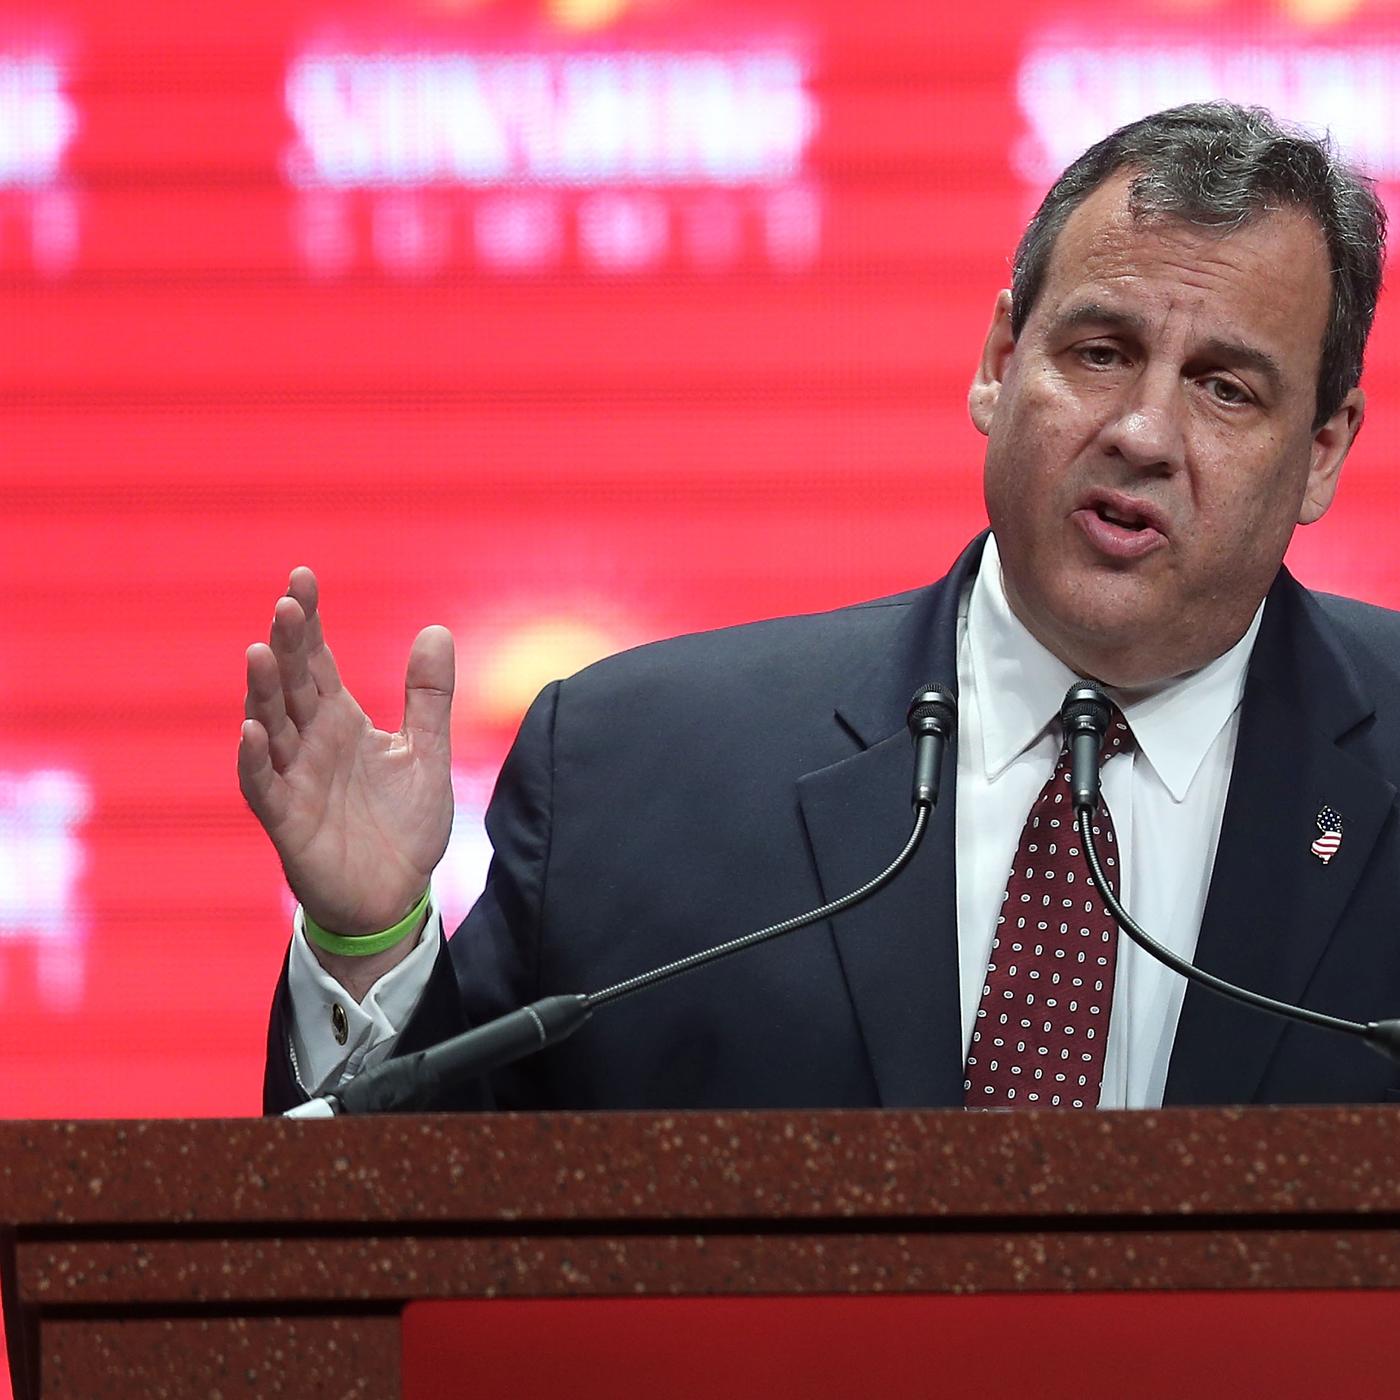 Fact checkers keep slamming Christie's campaign trail statements